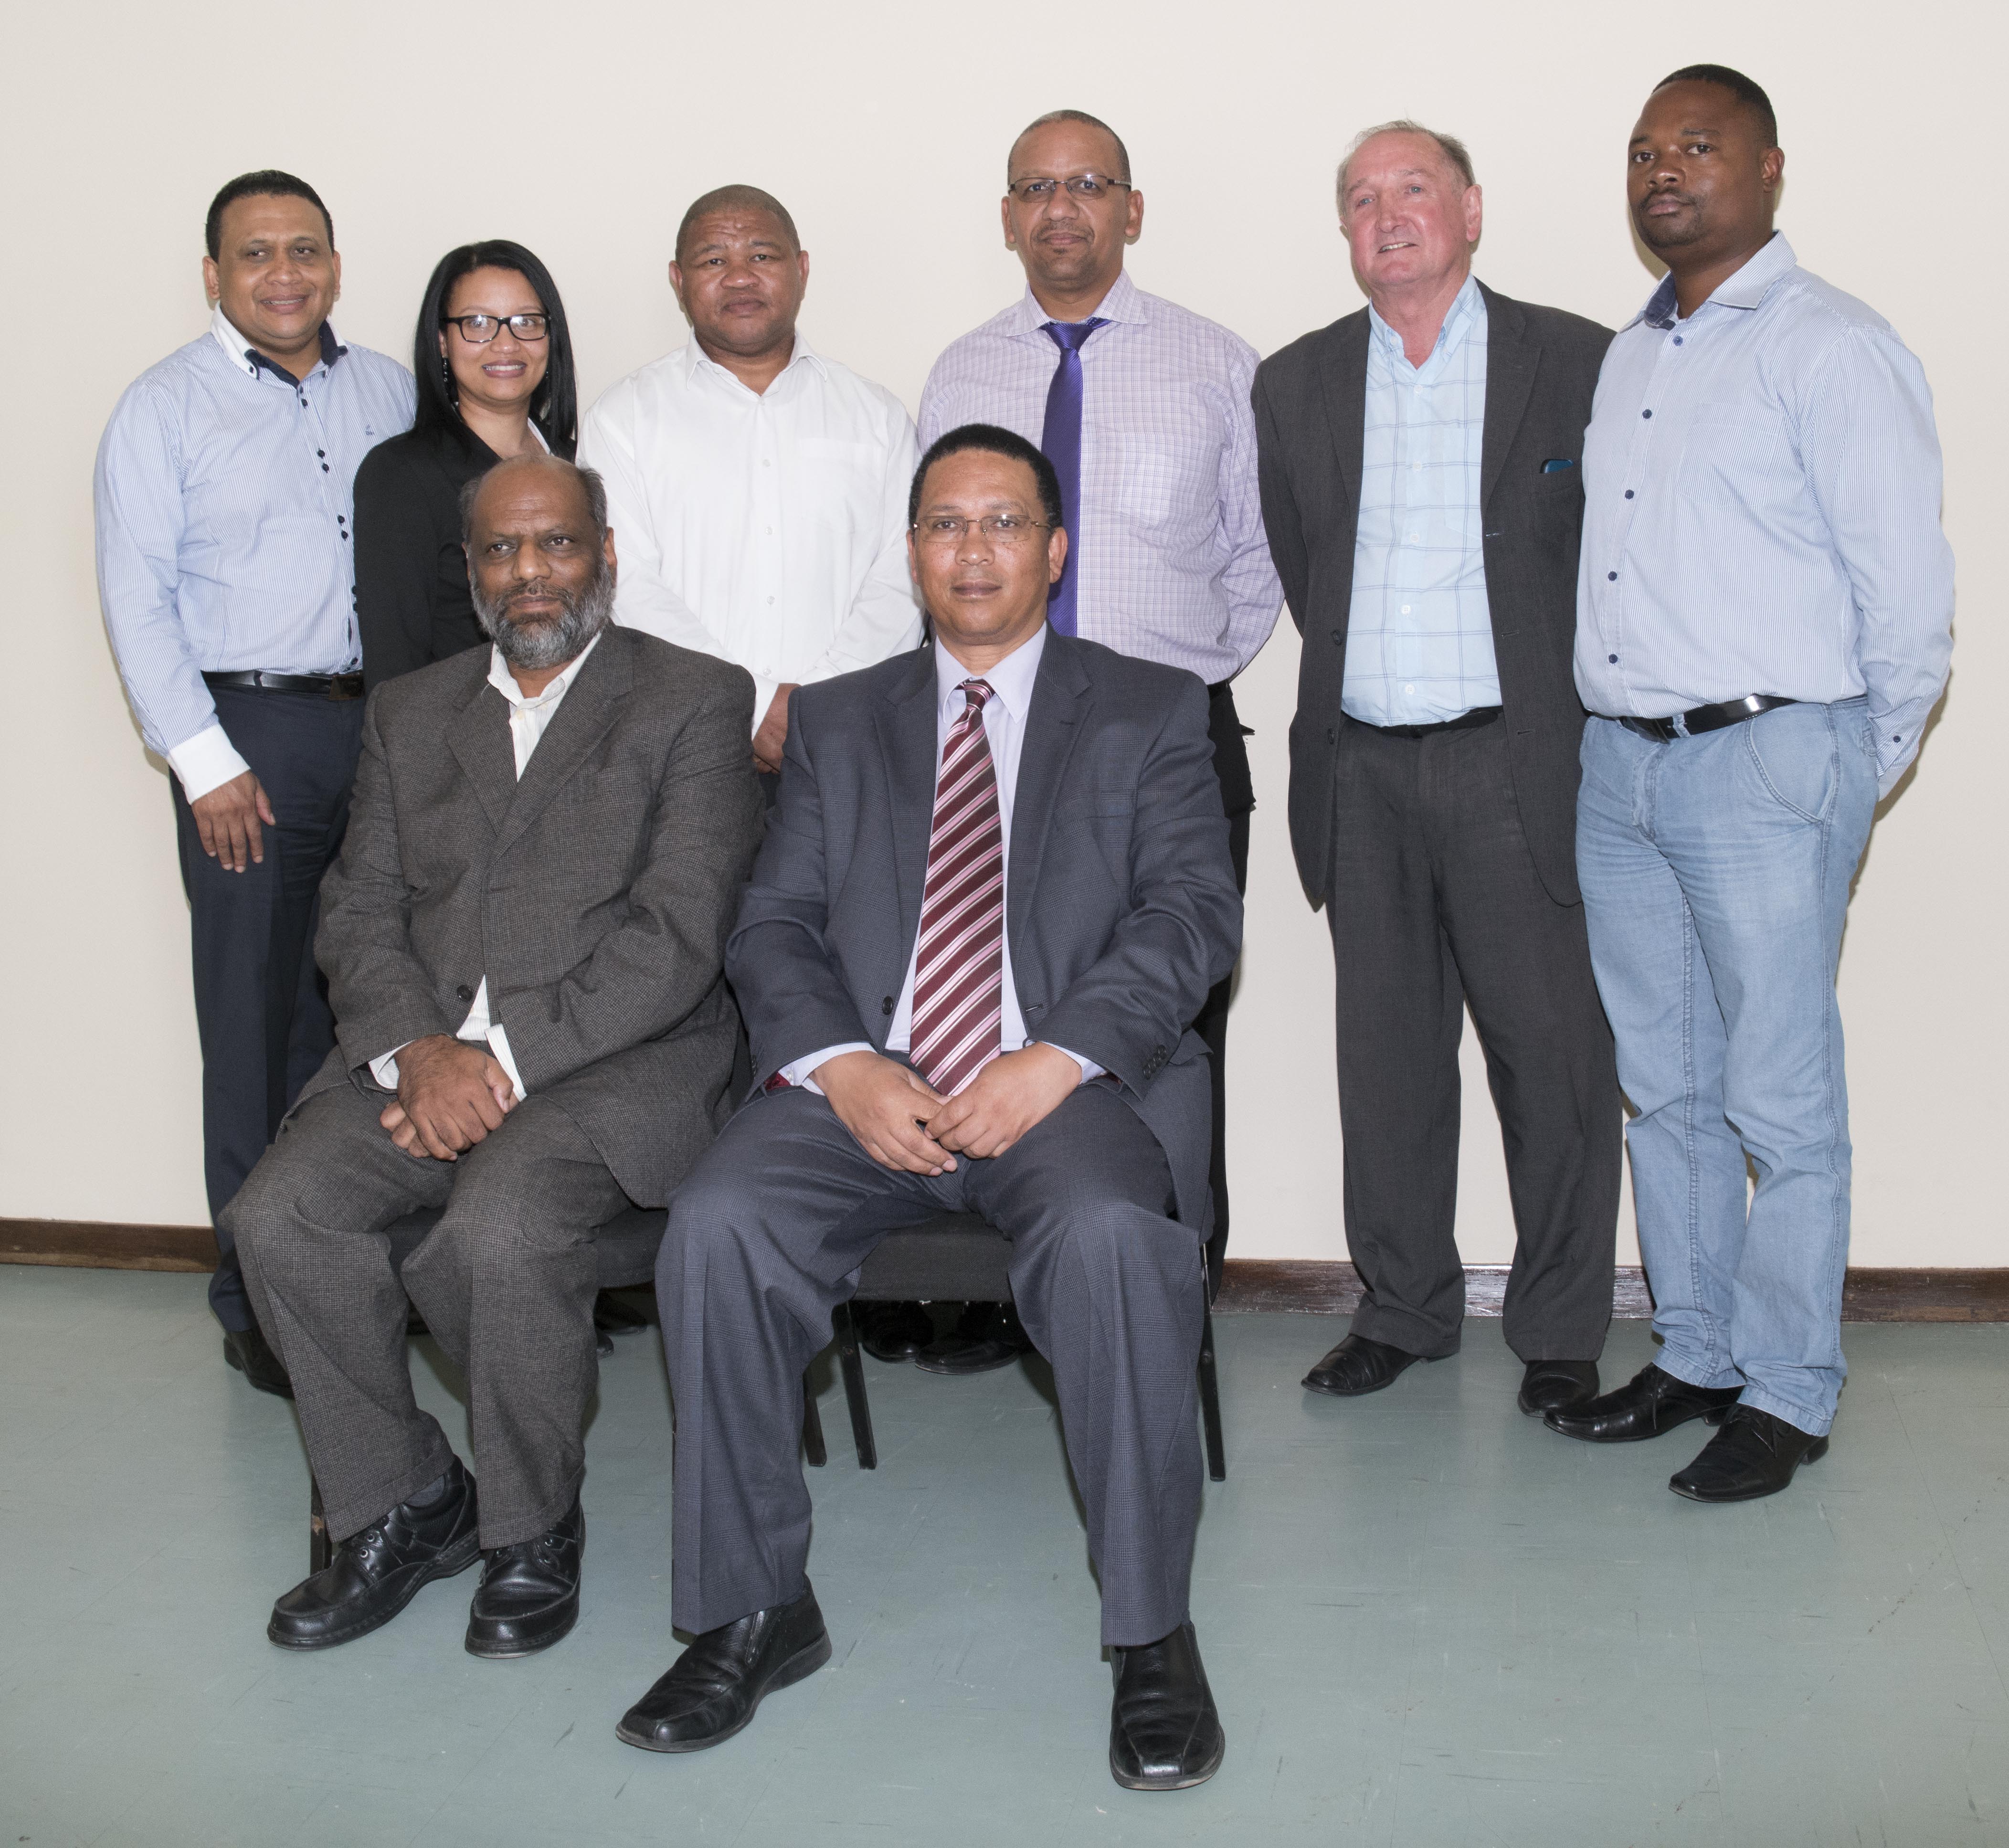 Oudtshoorn Administrator, Kam Chetty, Minister Meyer flanked by officials